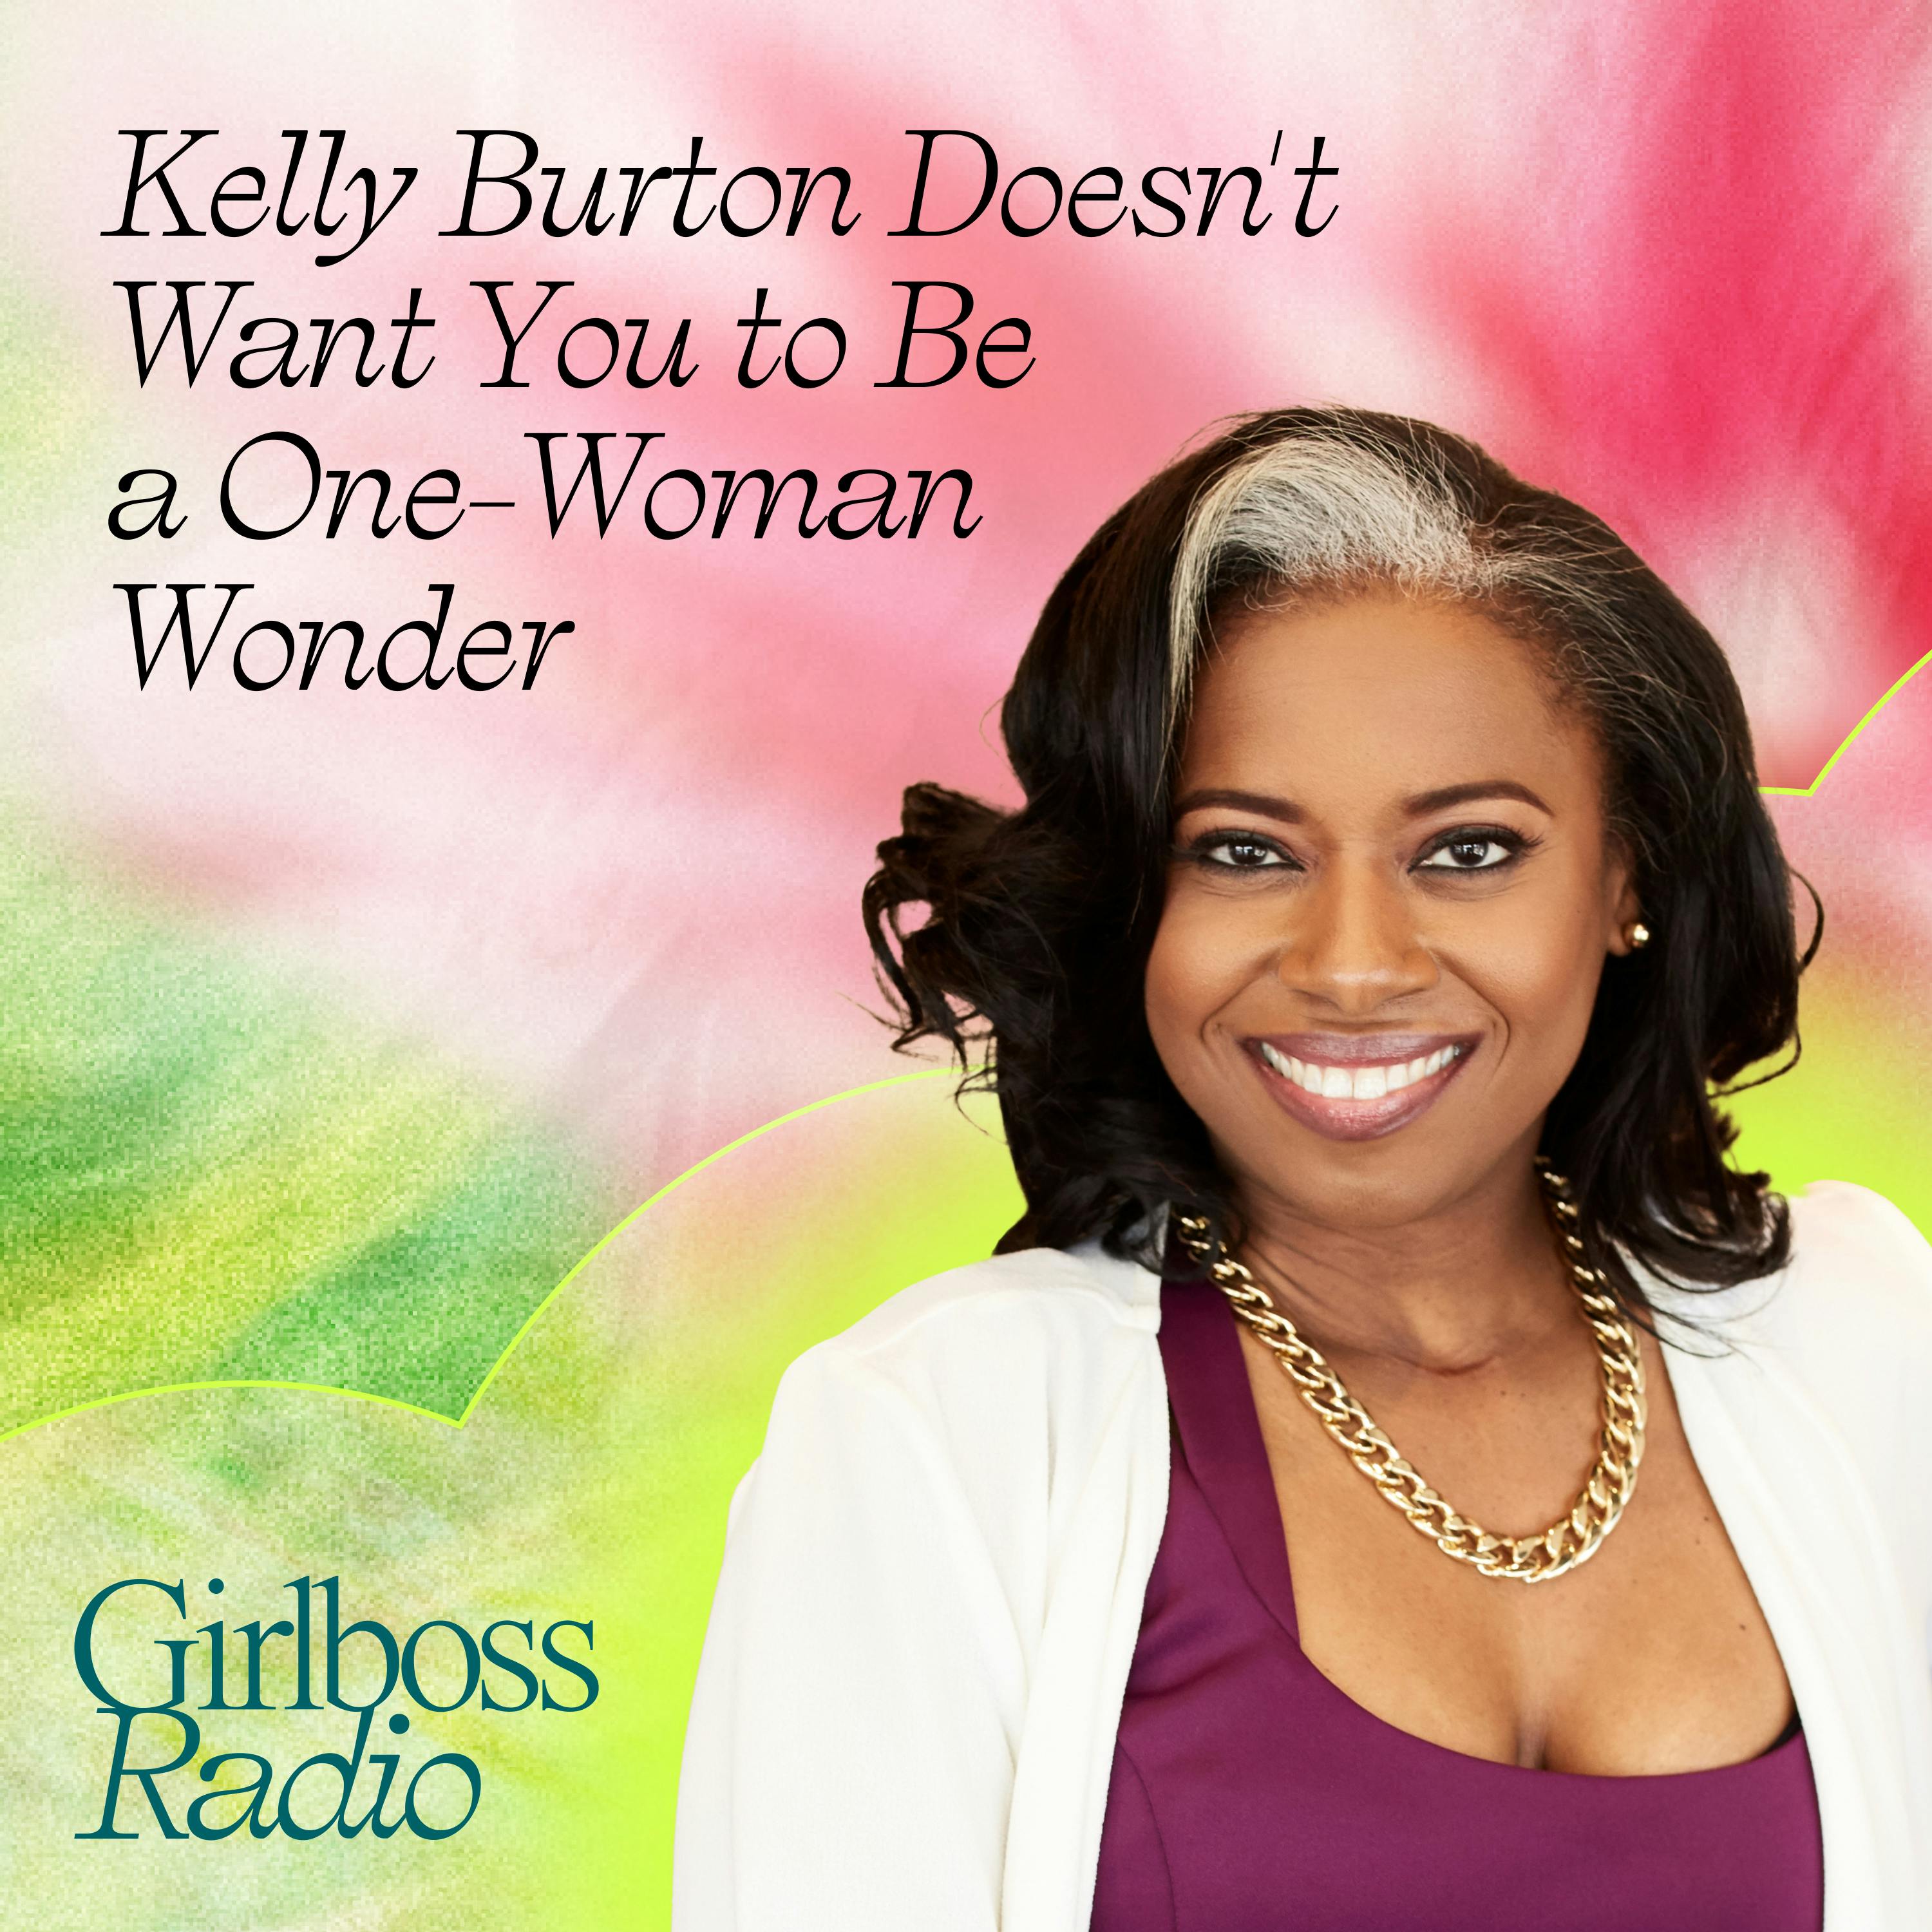 Kelly Burton Doesn't Want You to Be a One-Woman Wonder